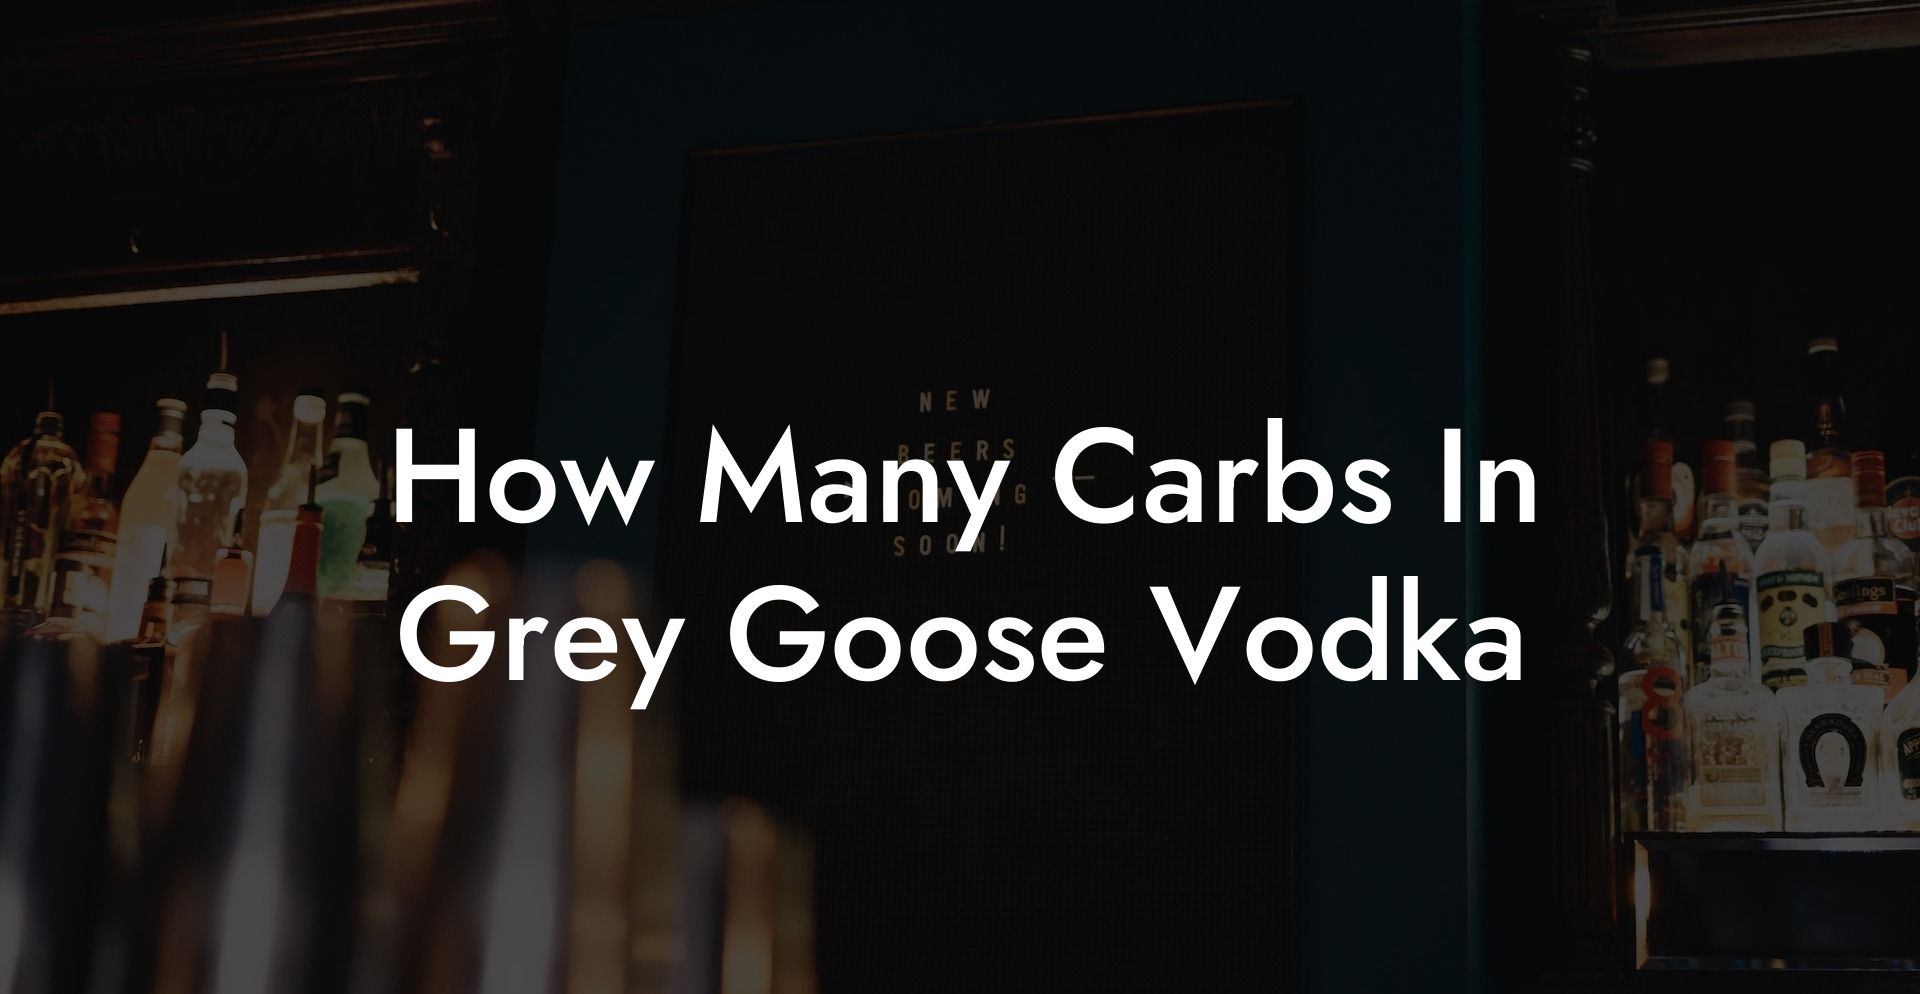 How Many Carbs In Grey Goose Vodka